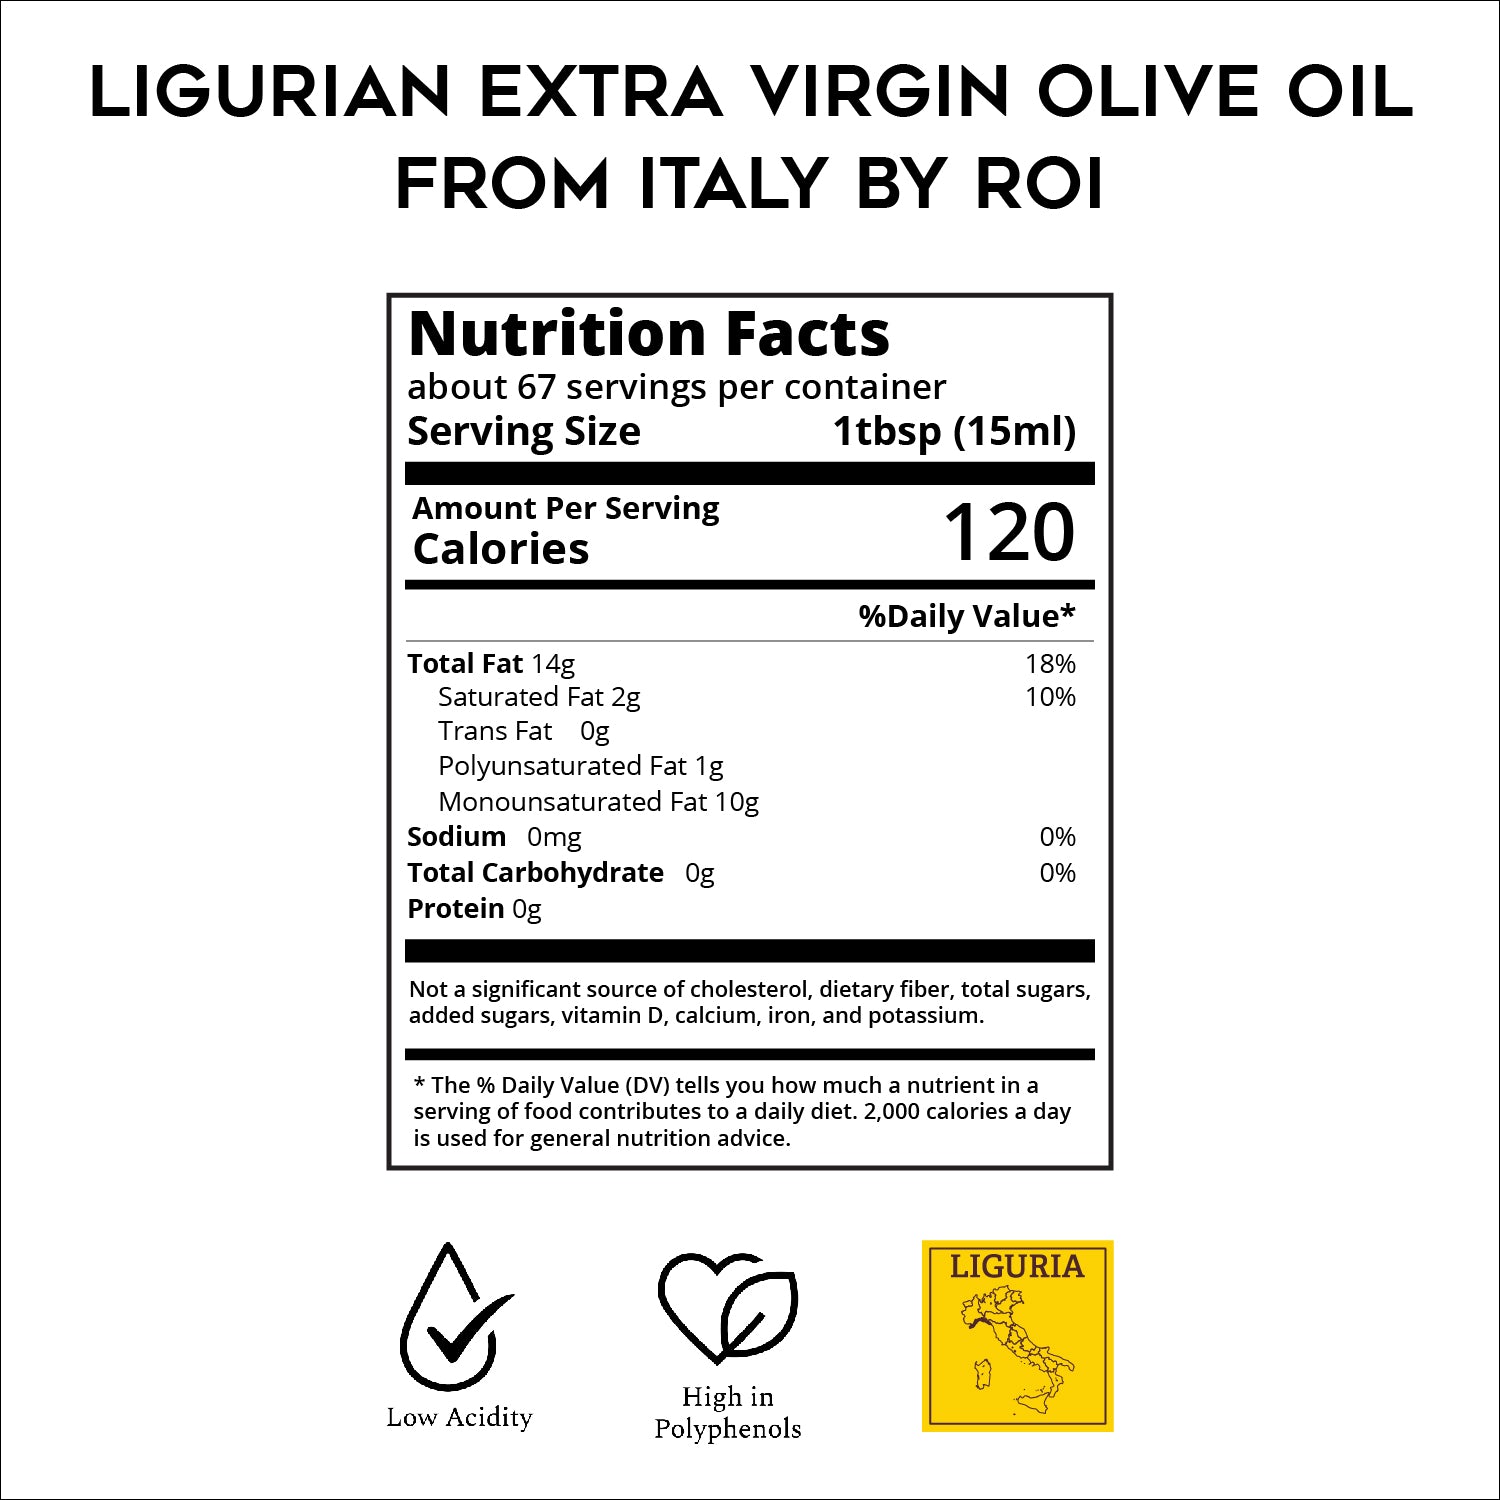 Ligurian Extra Virgin Olive Oil From Italy by ROI